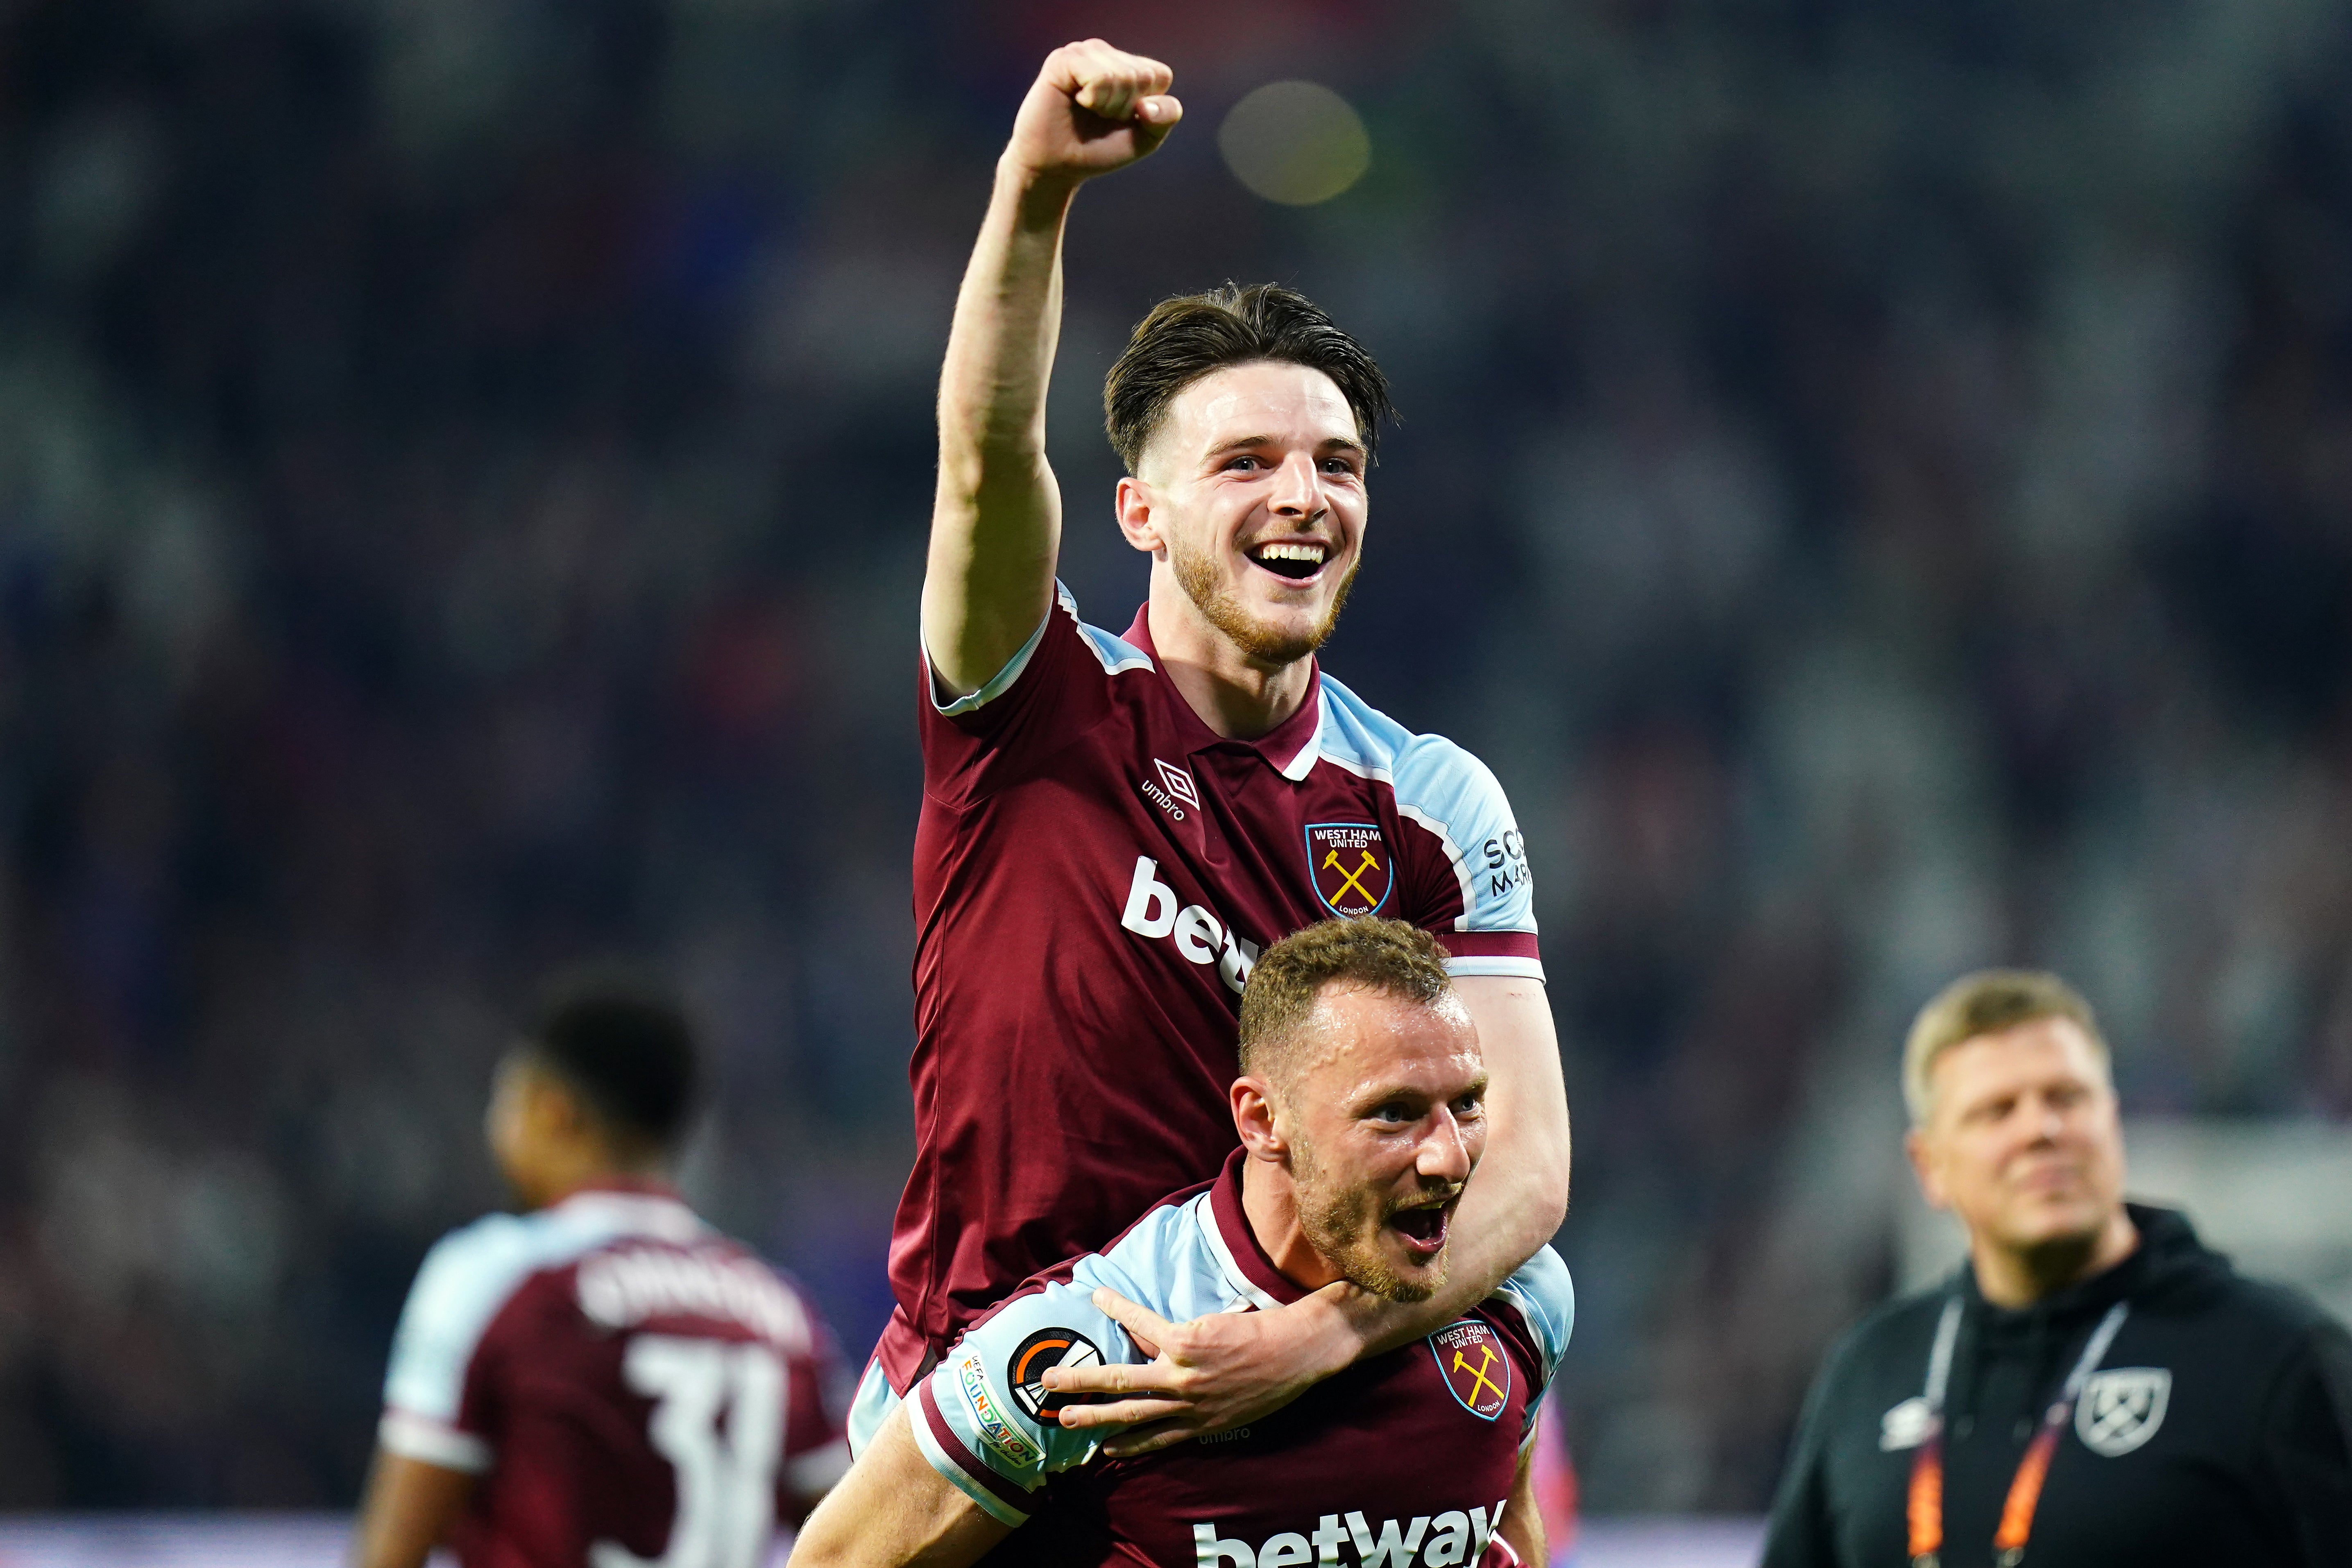 Declan Rice has been linked with a move away from West Ham